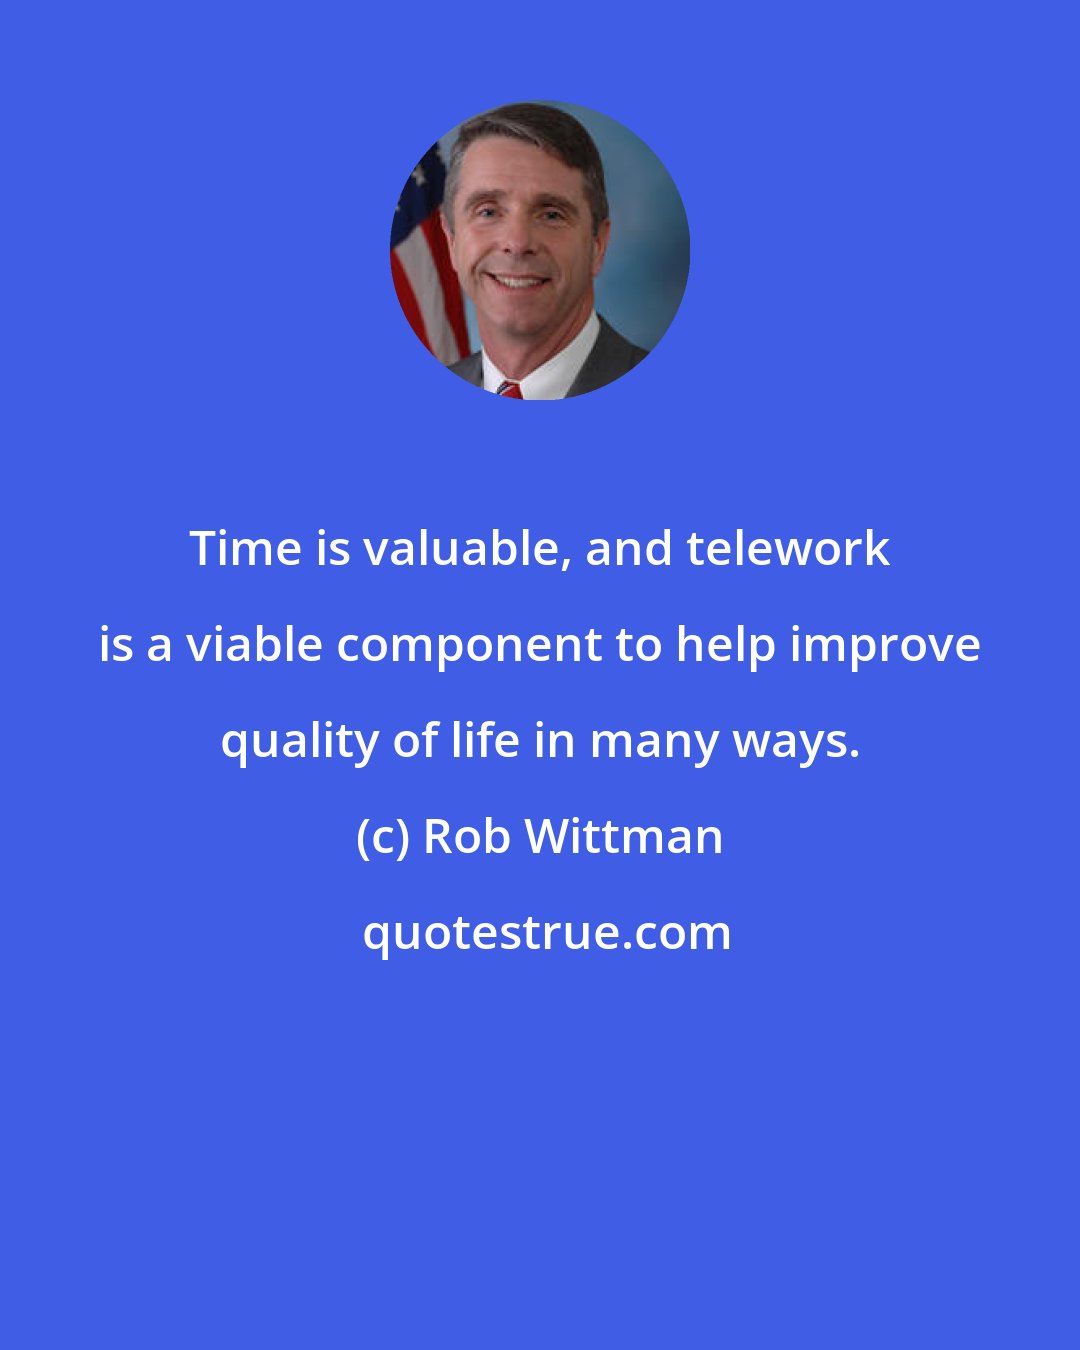 Rob Wittman: Time is valuable, and telework is a viable component to help improve quality of life in many ways.